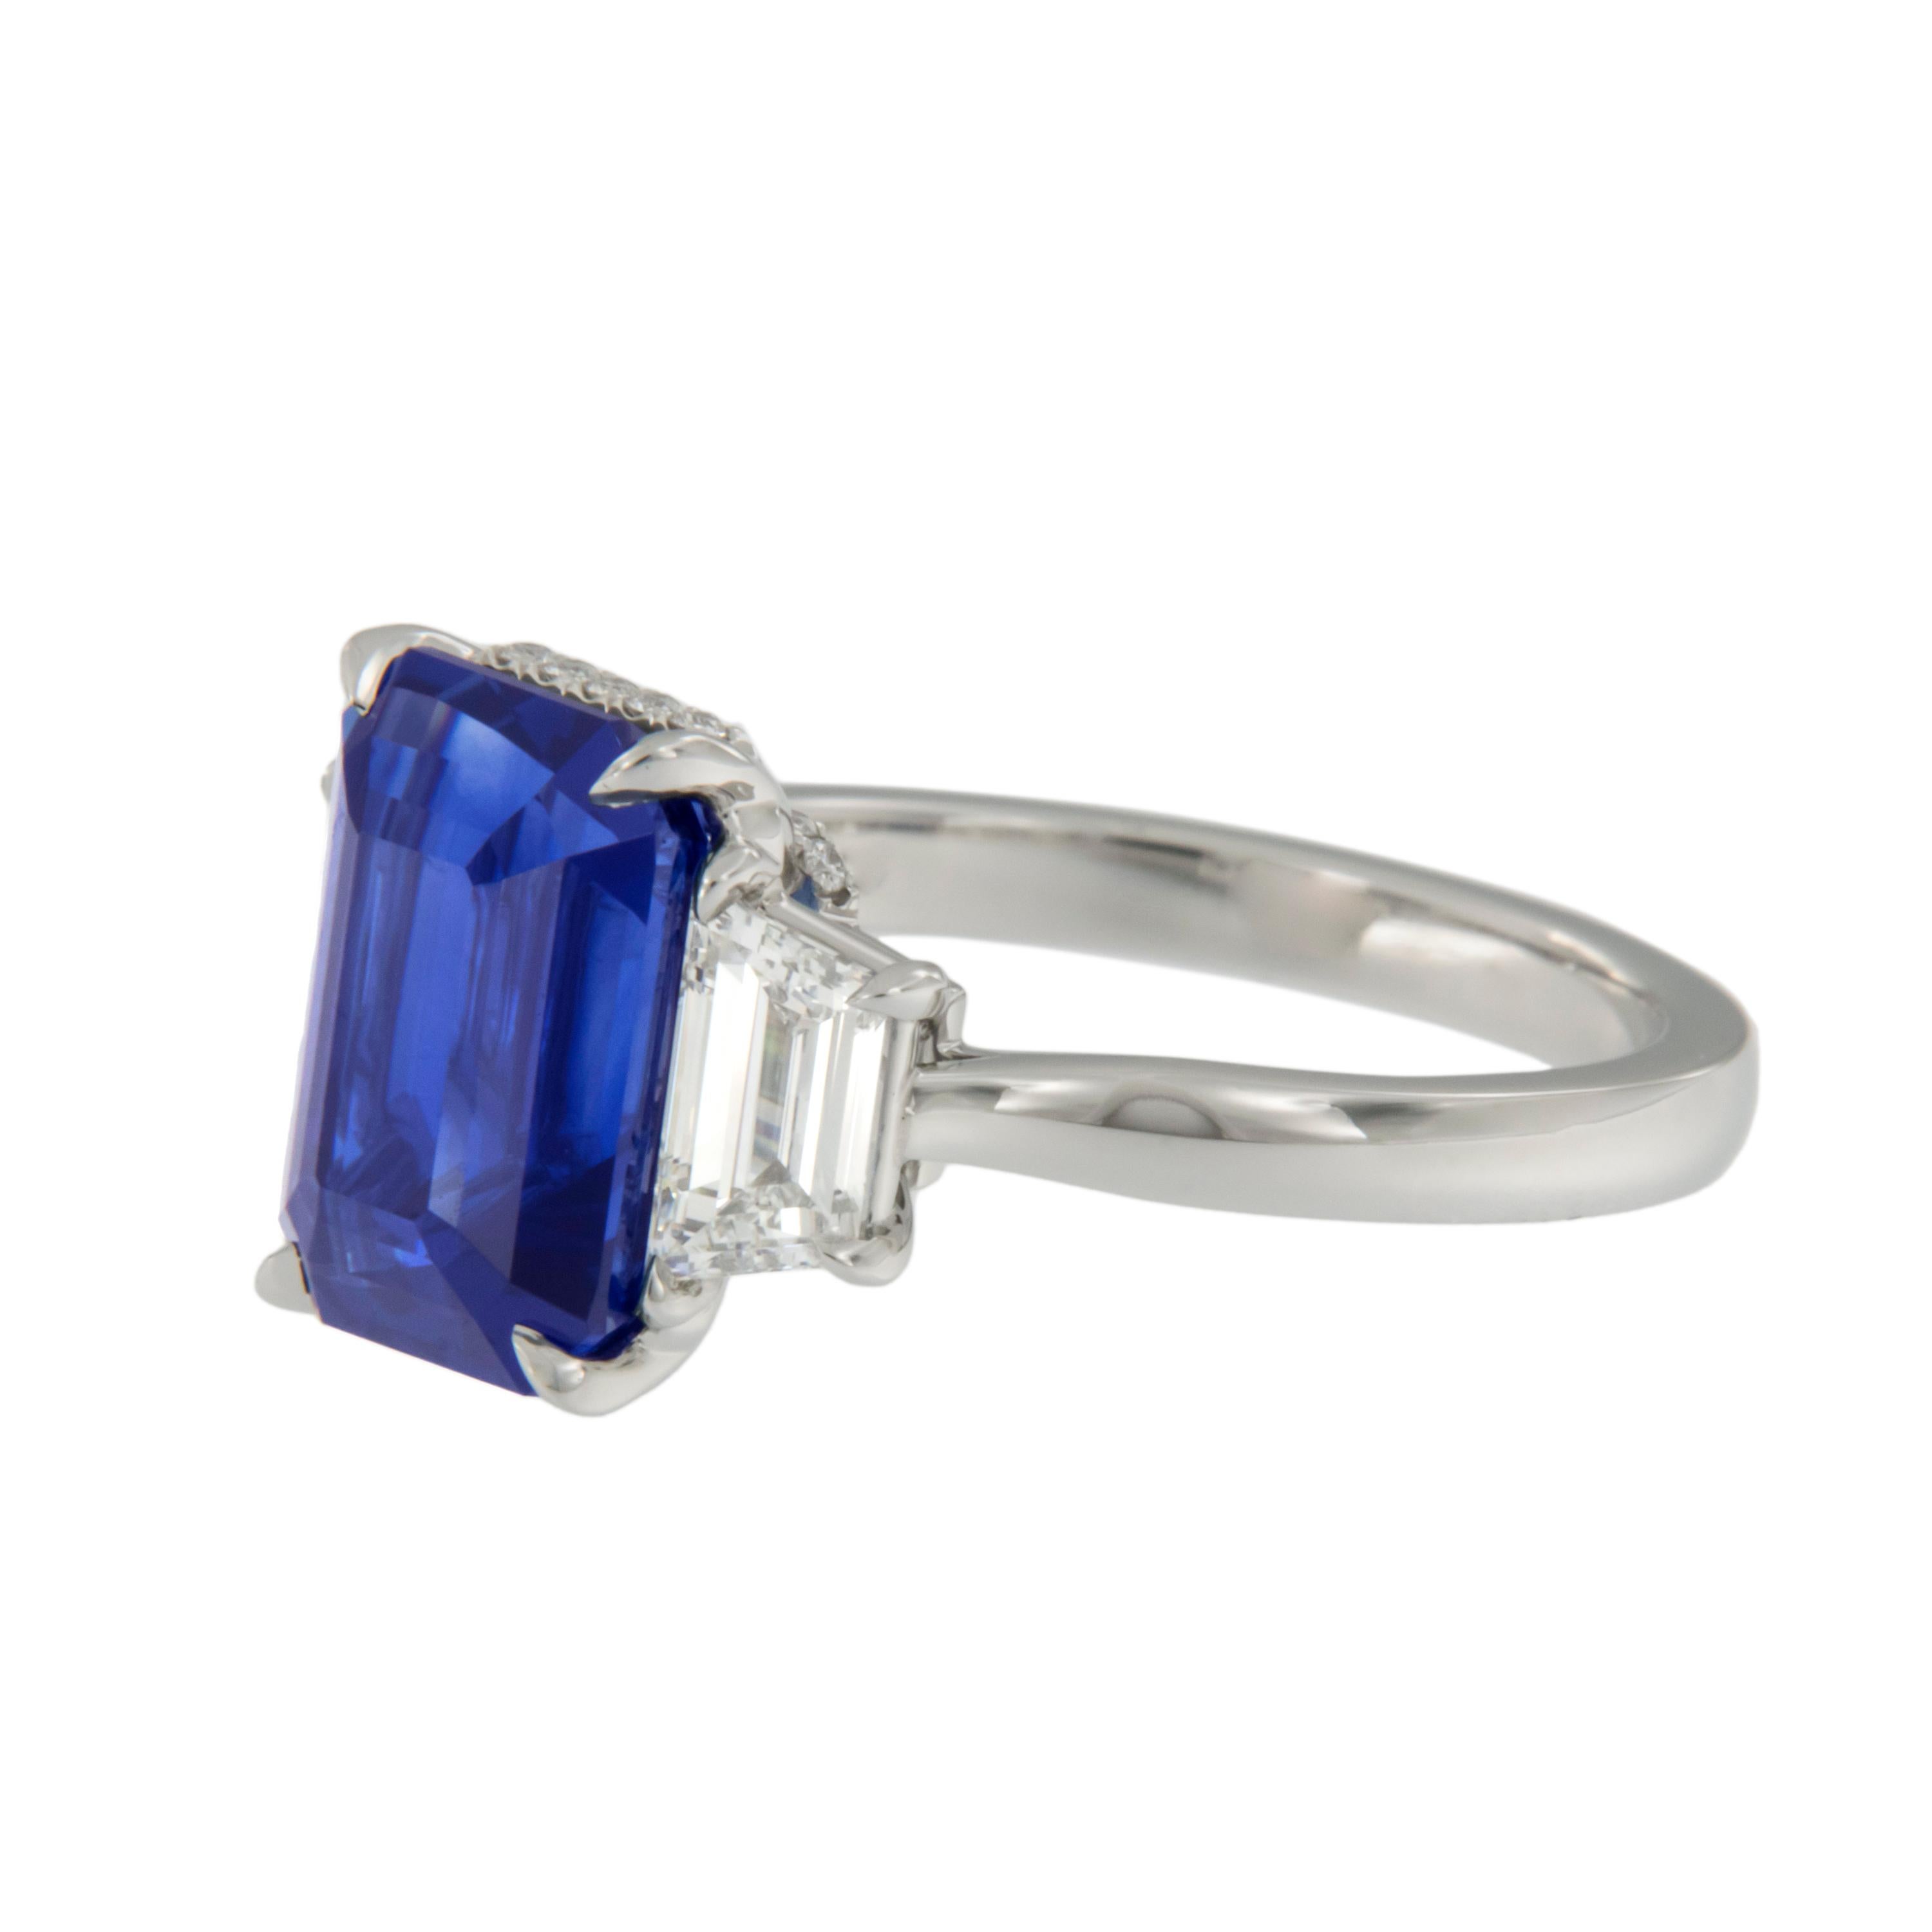 Handmade in New York by William Rosenberg this once in a lifetime ring is the best of the best! GIA Report states this Sri Lanka natural, heat only sapphire's color is referred to as 